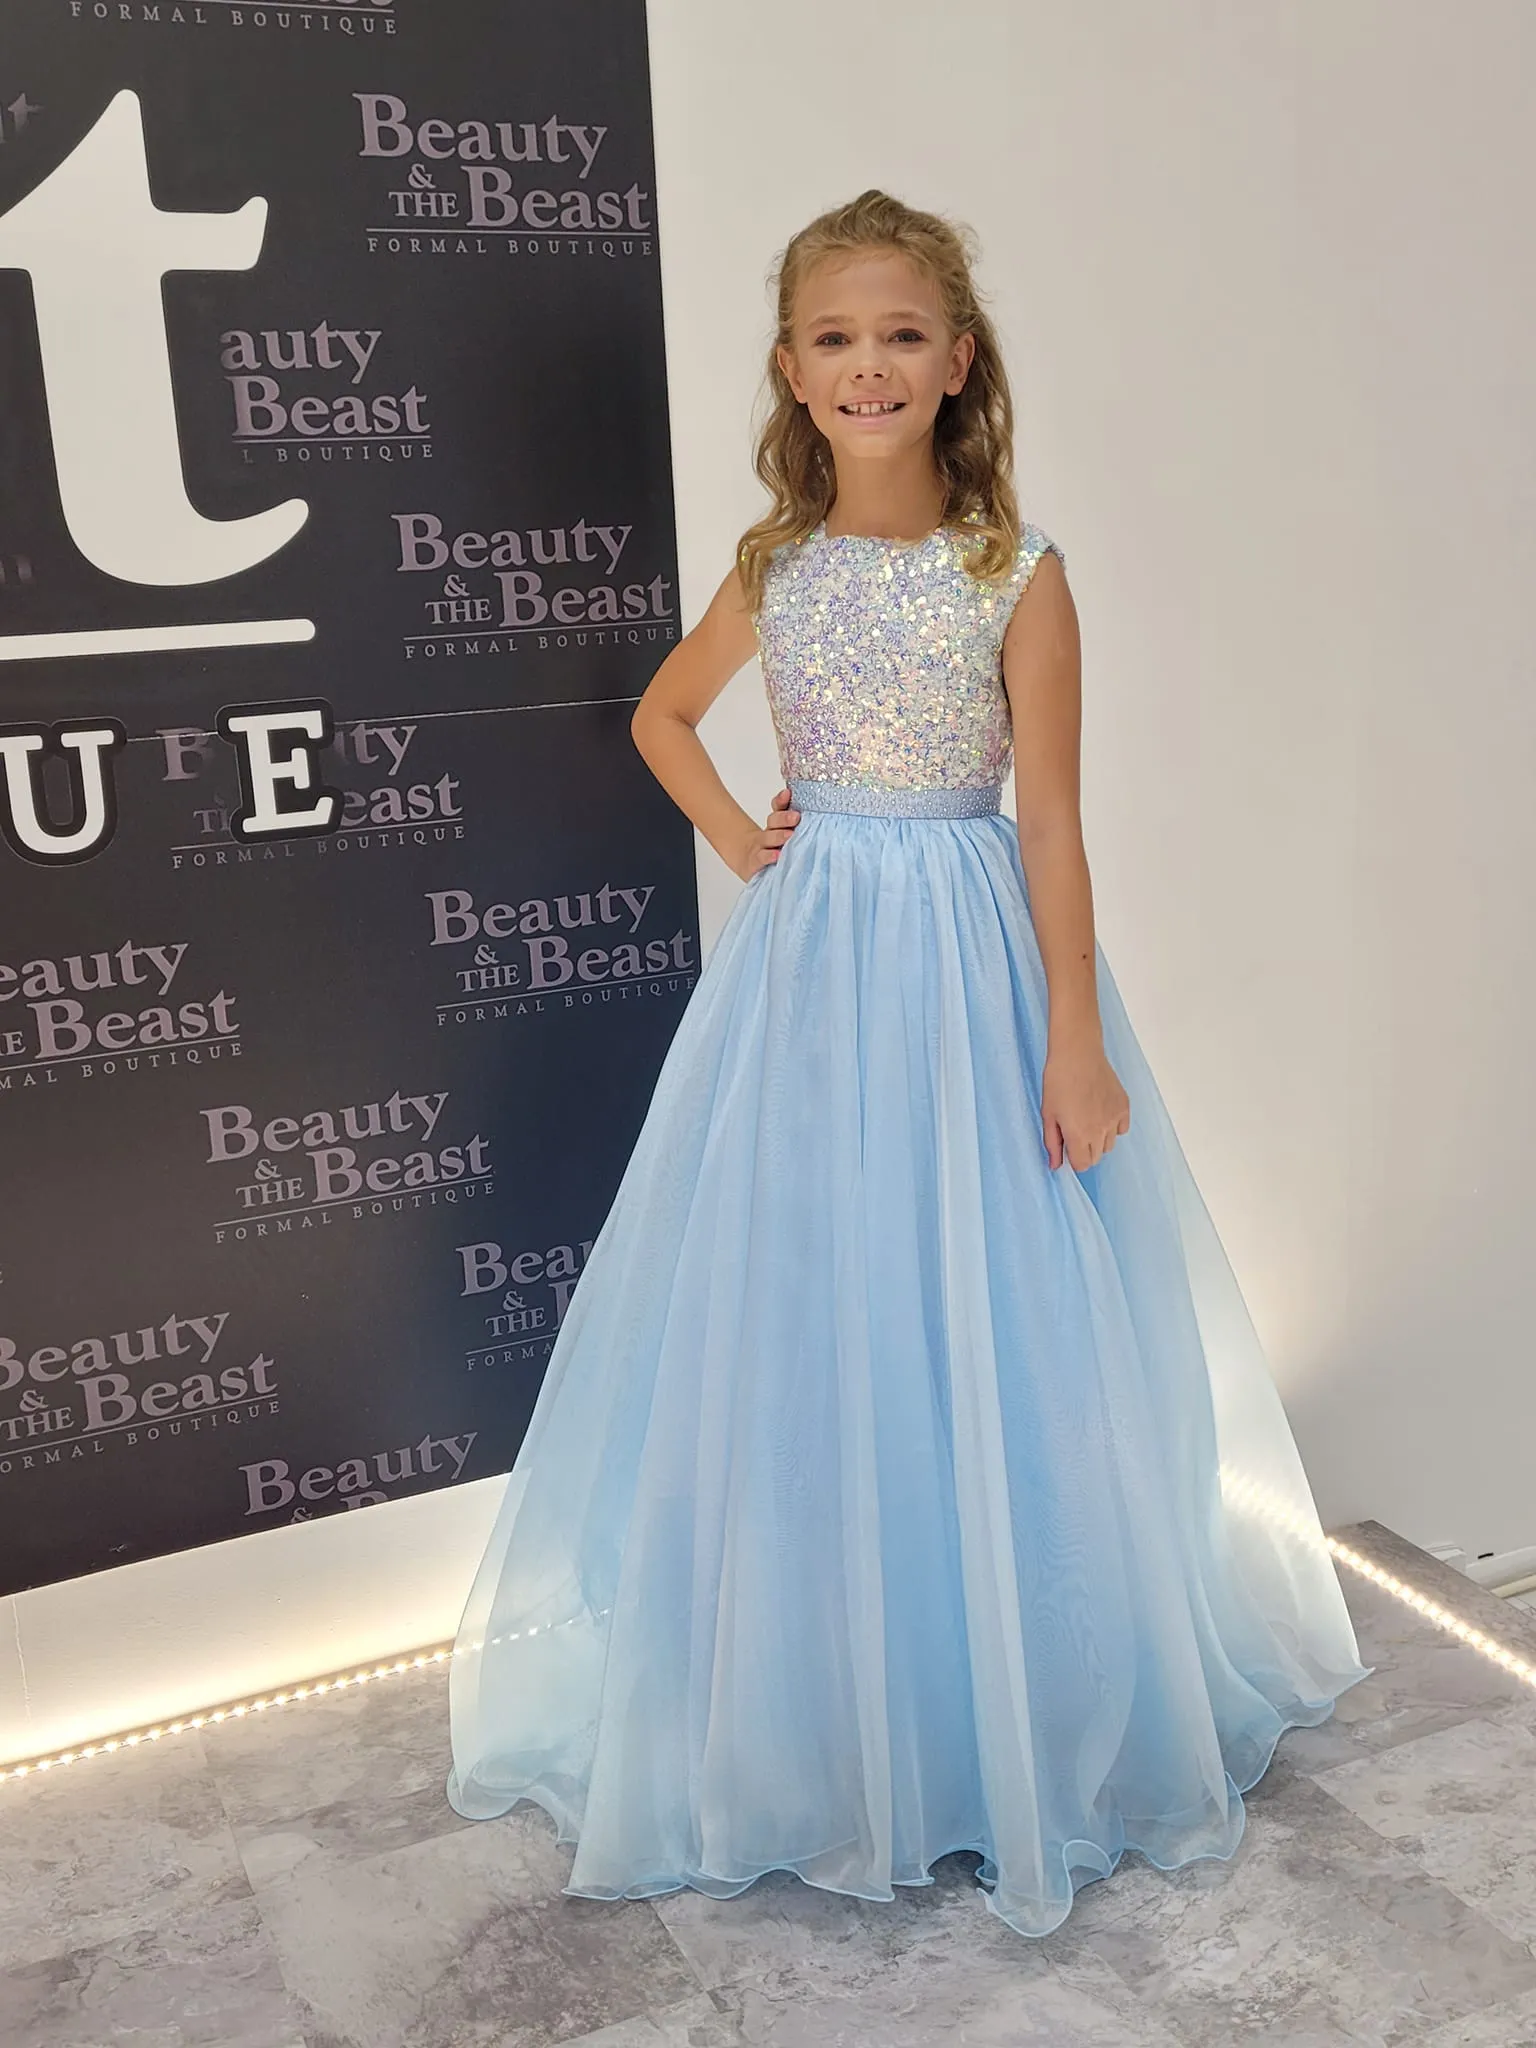 Girls Sequin Pageant Dress, Short Sleeve A Line Party Gown For Toddler To  Preteen From Uniquebridalboutique, $85.43